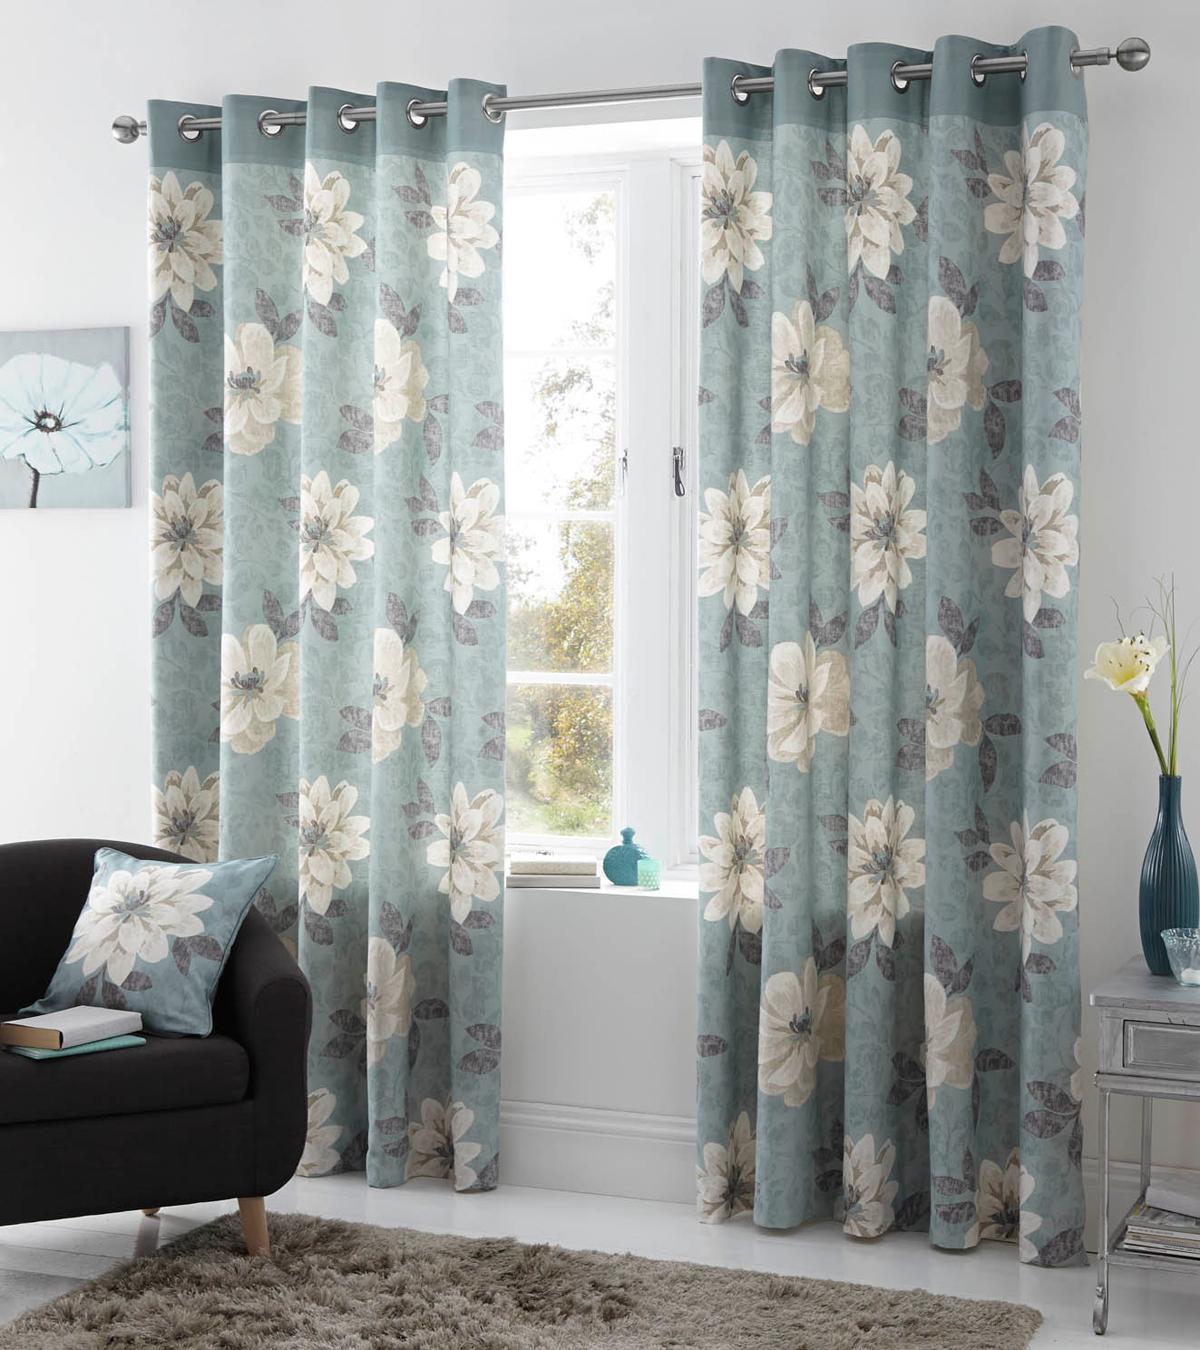 Pictures of Annabella Ready Made Eyelet Curtains duck egg blue curtains